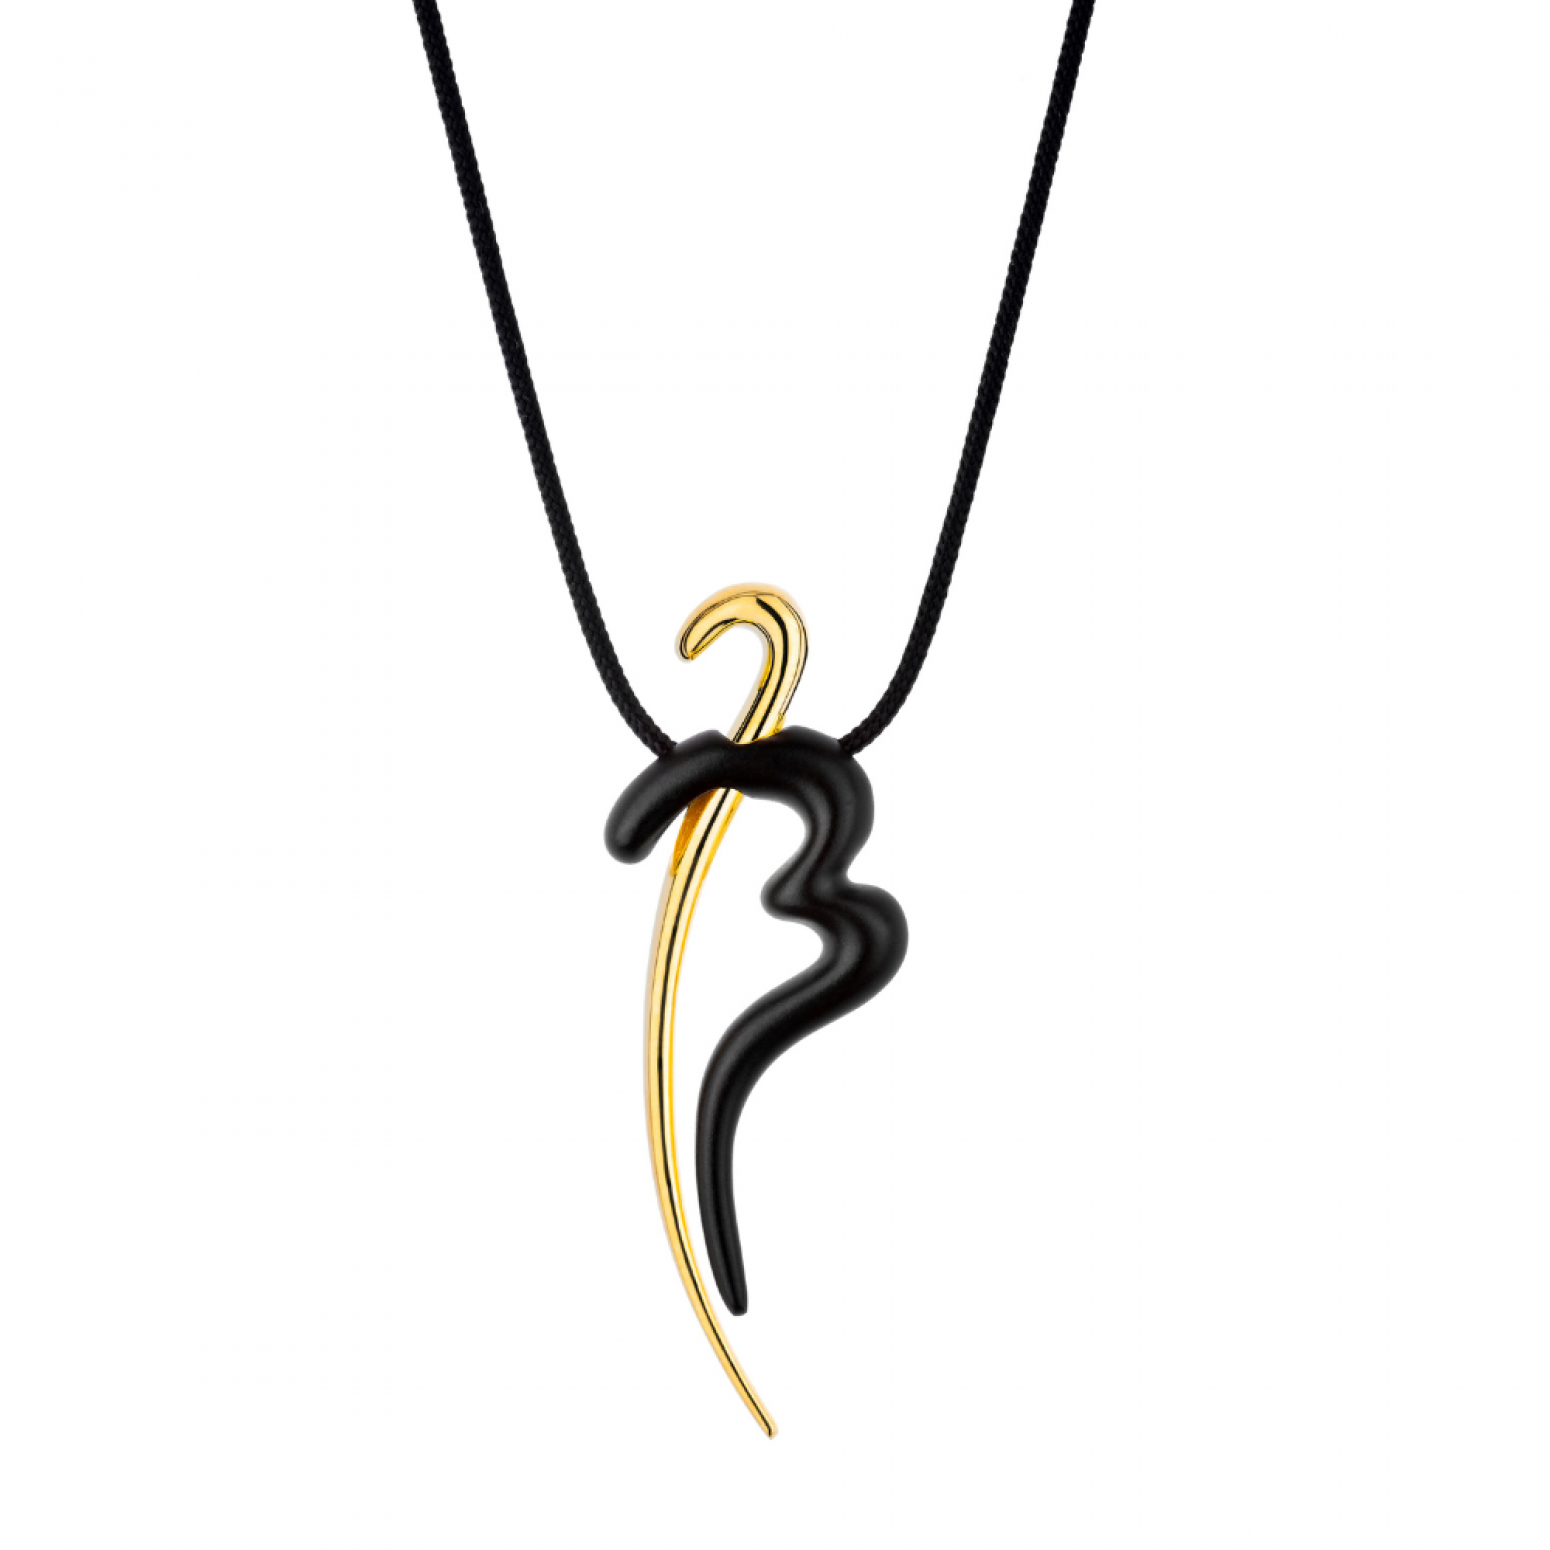 Necklace Lucky Charm 2023, Honor Omano, Heart 23 brass plated in yellow gold and black metal, ko5717 NECKLACES Κοσμηματα - chrilia.gr